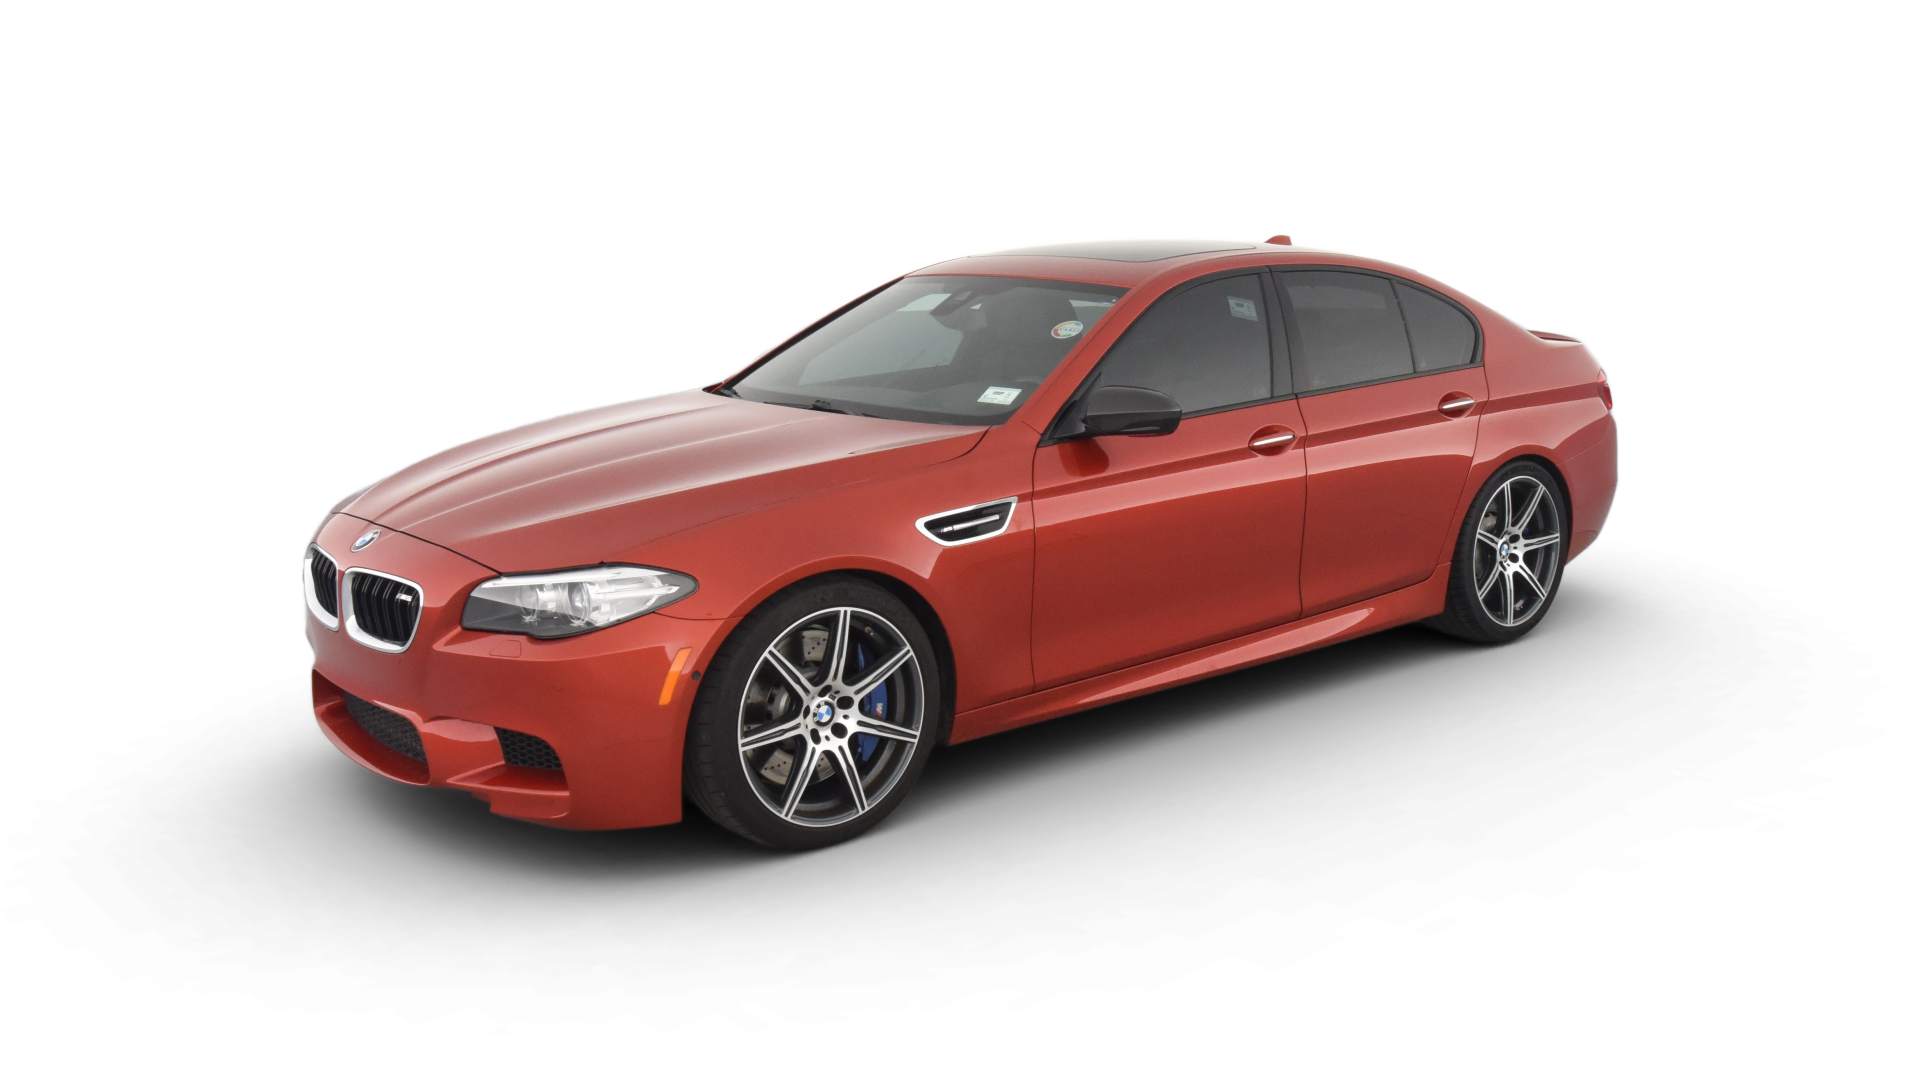 Used BMW M5 for Sale Online